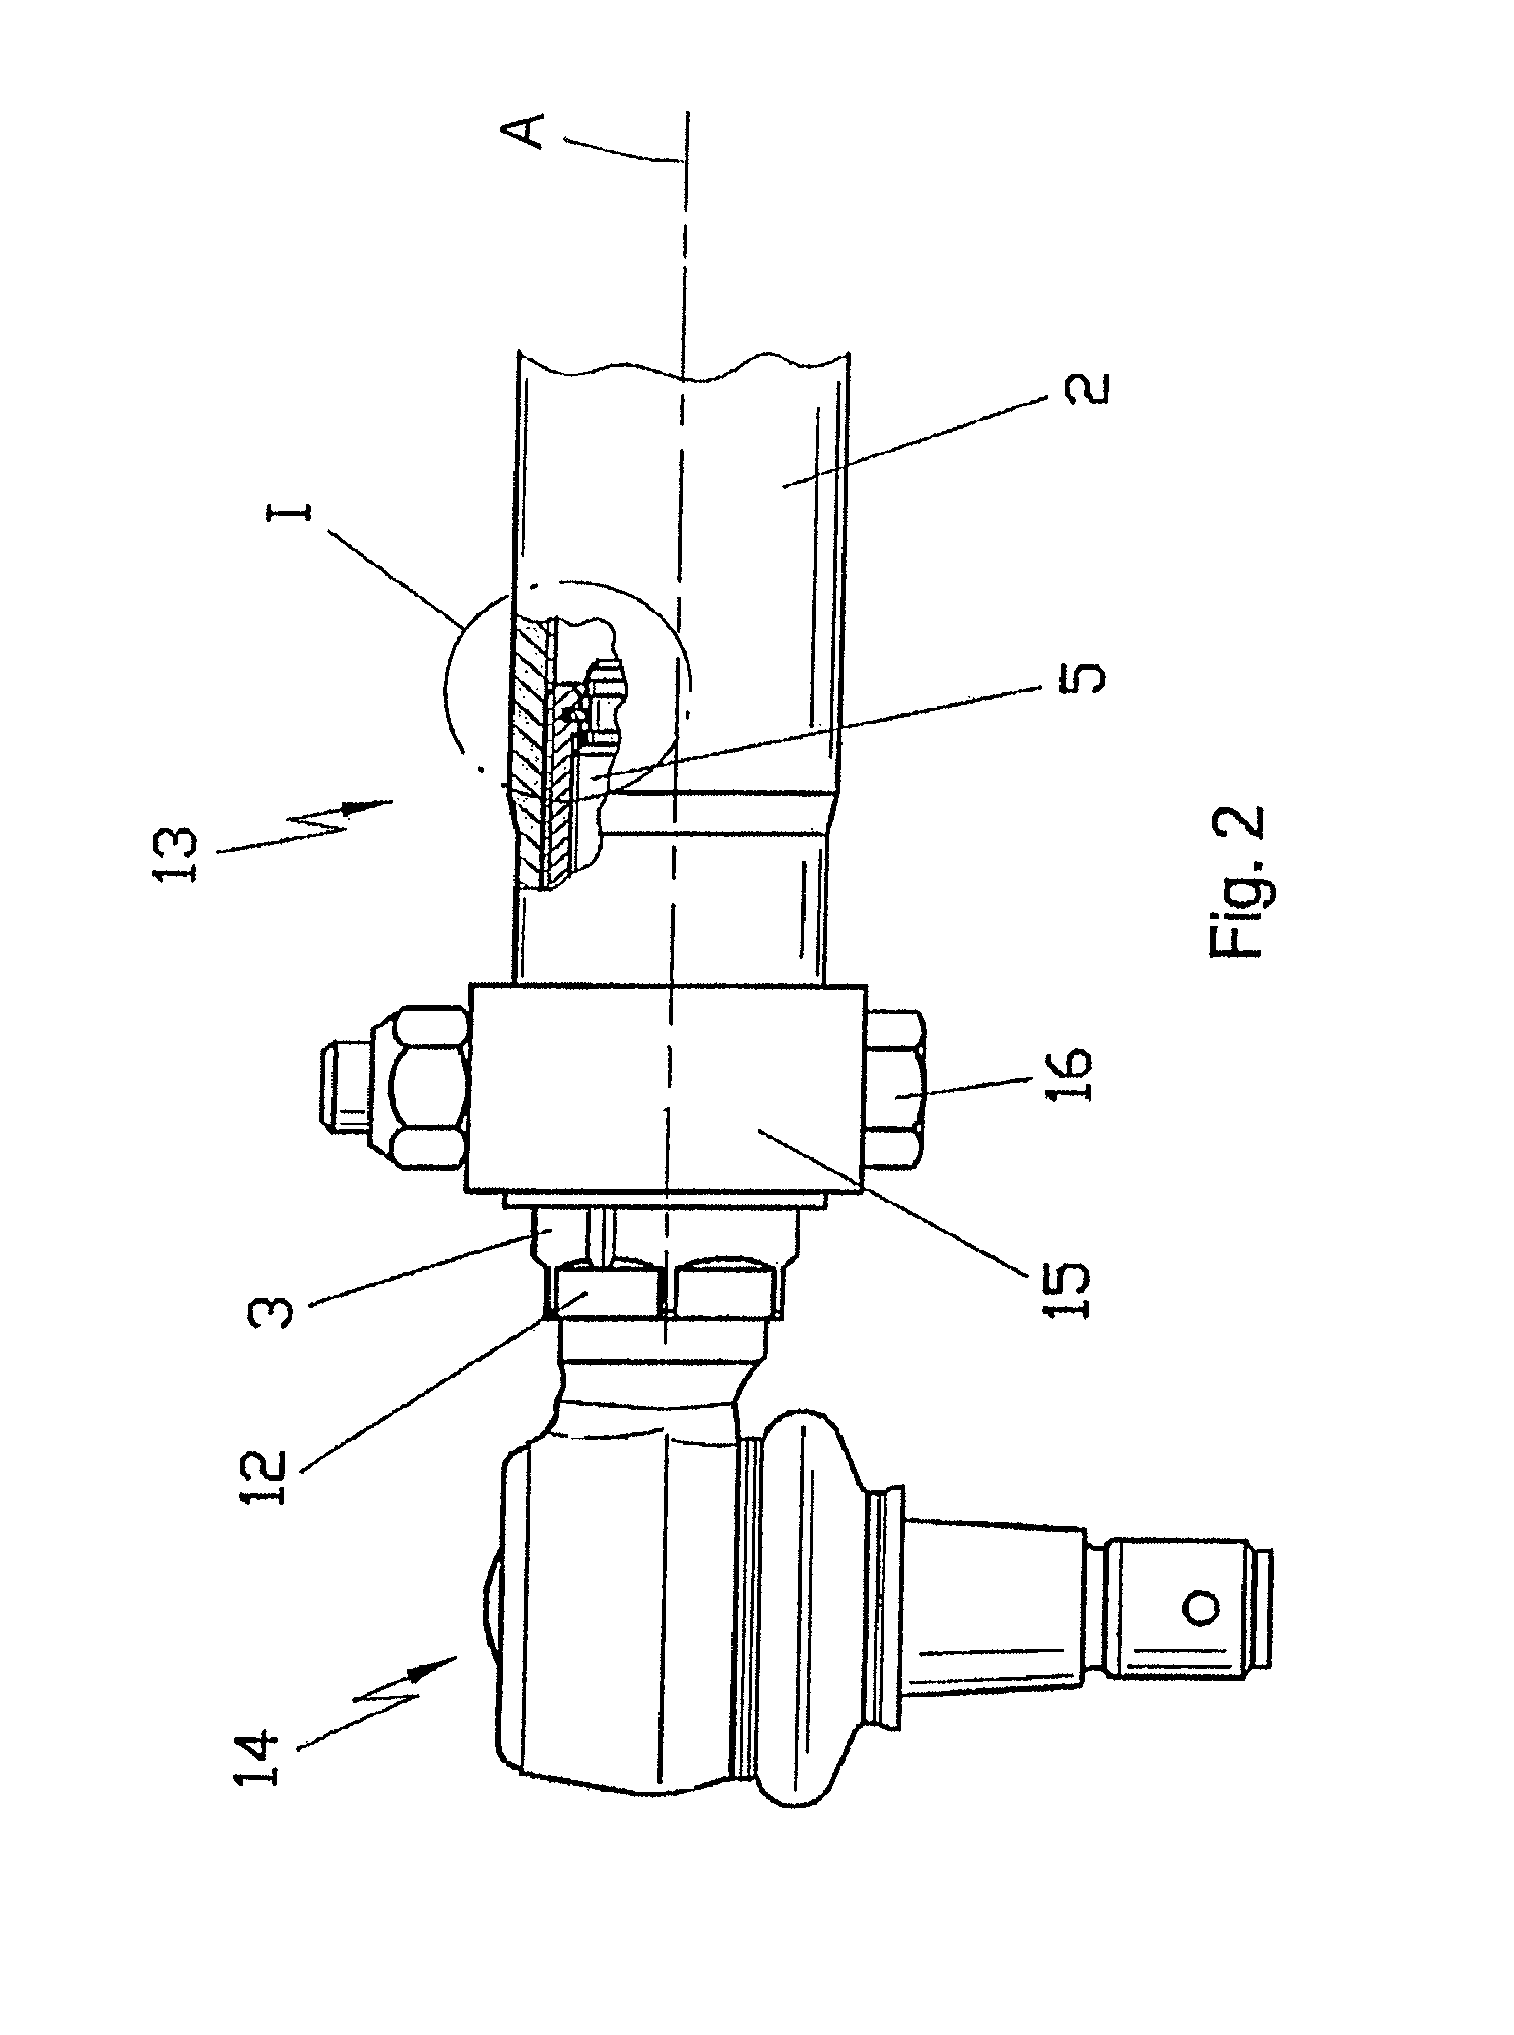 Structural unit with axial adjustment limiting elements